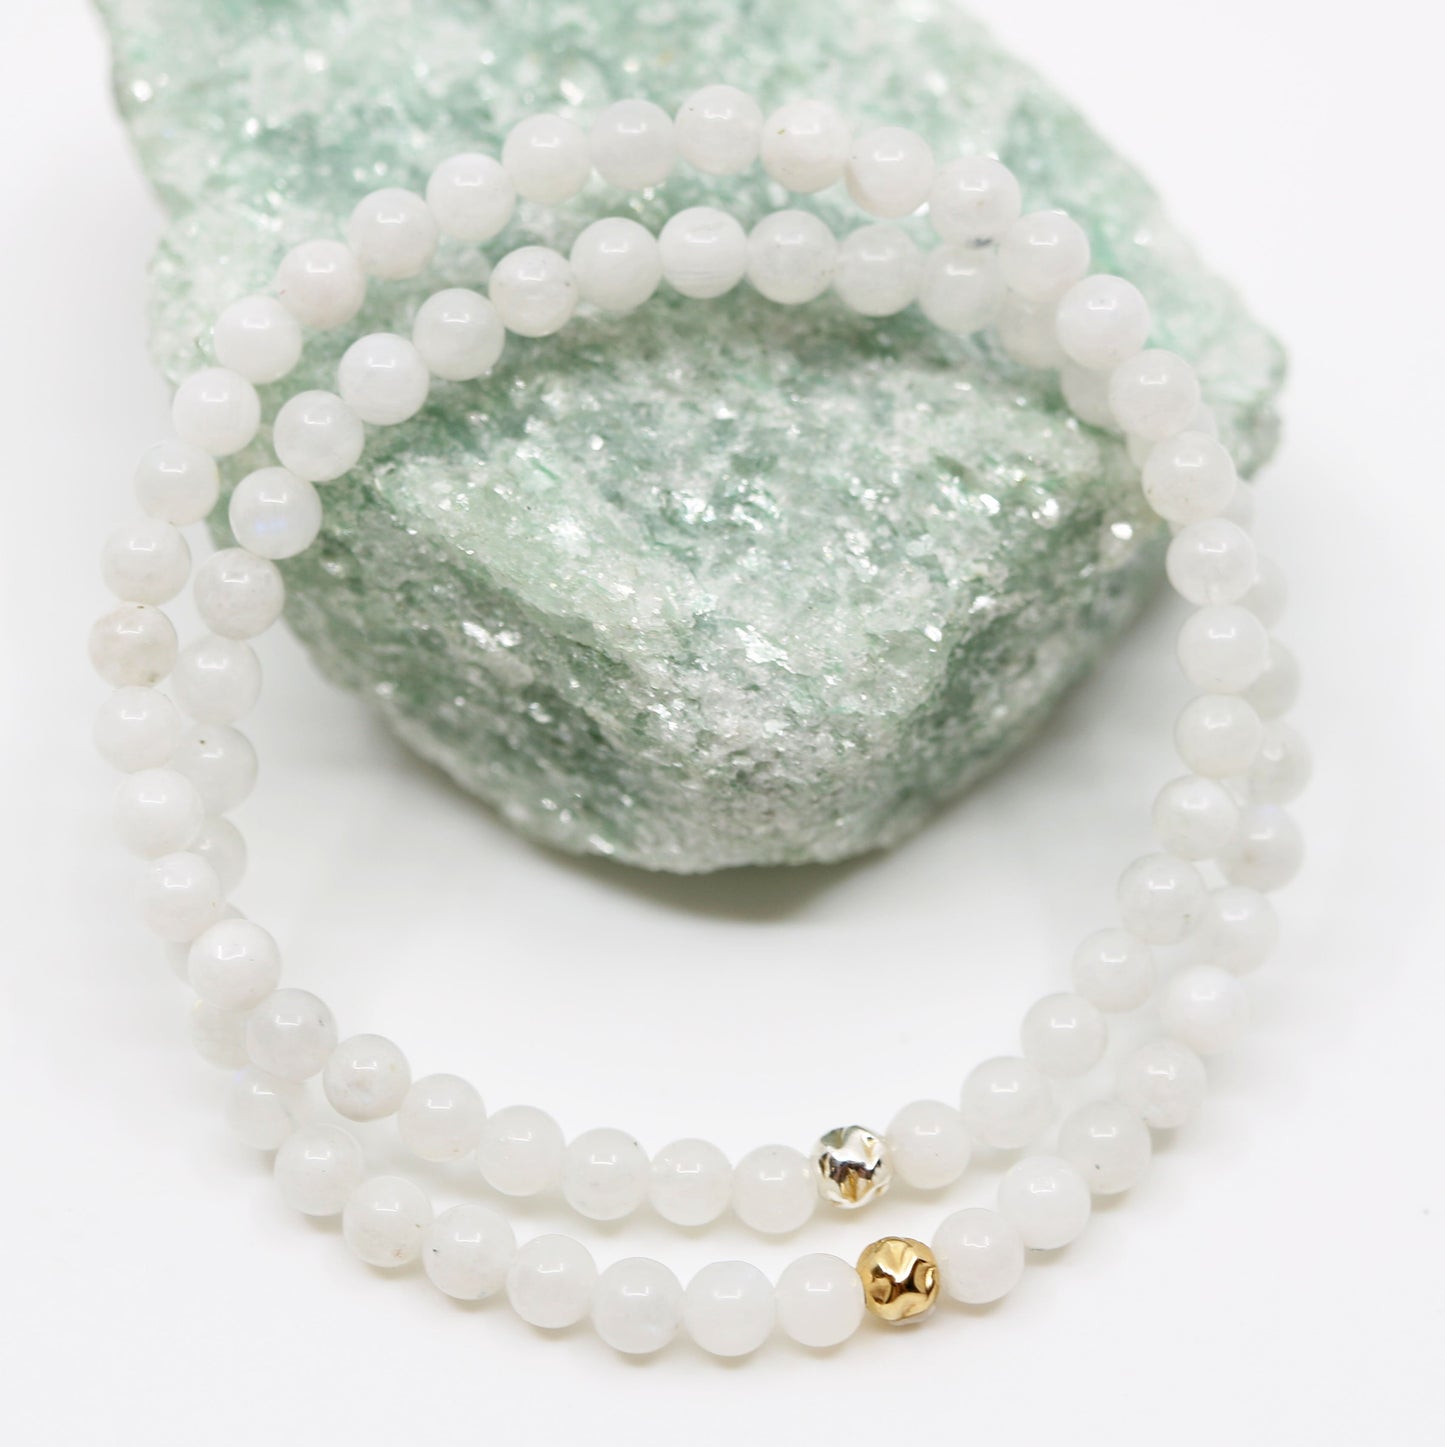 Dainty Balance and Intuition Bracelet - Moonstone